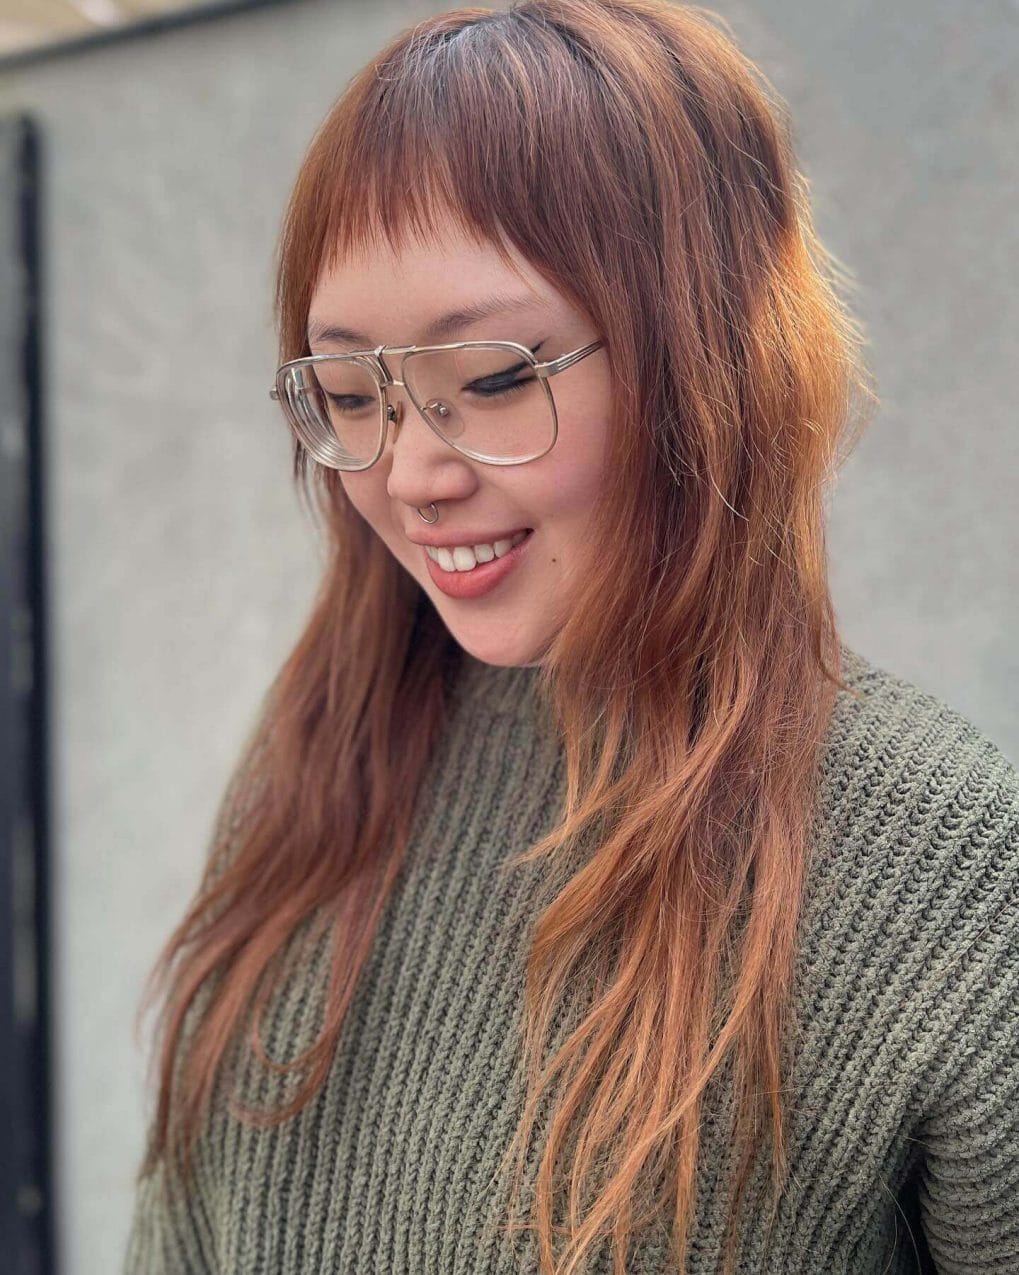 Long wavy hair with a bold micro-fringe